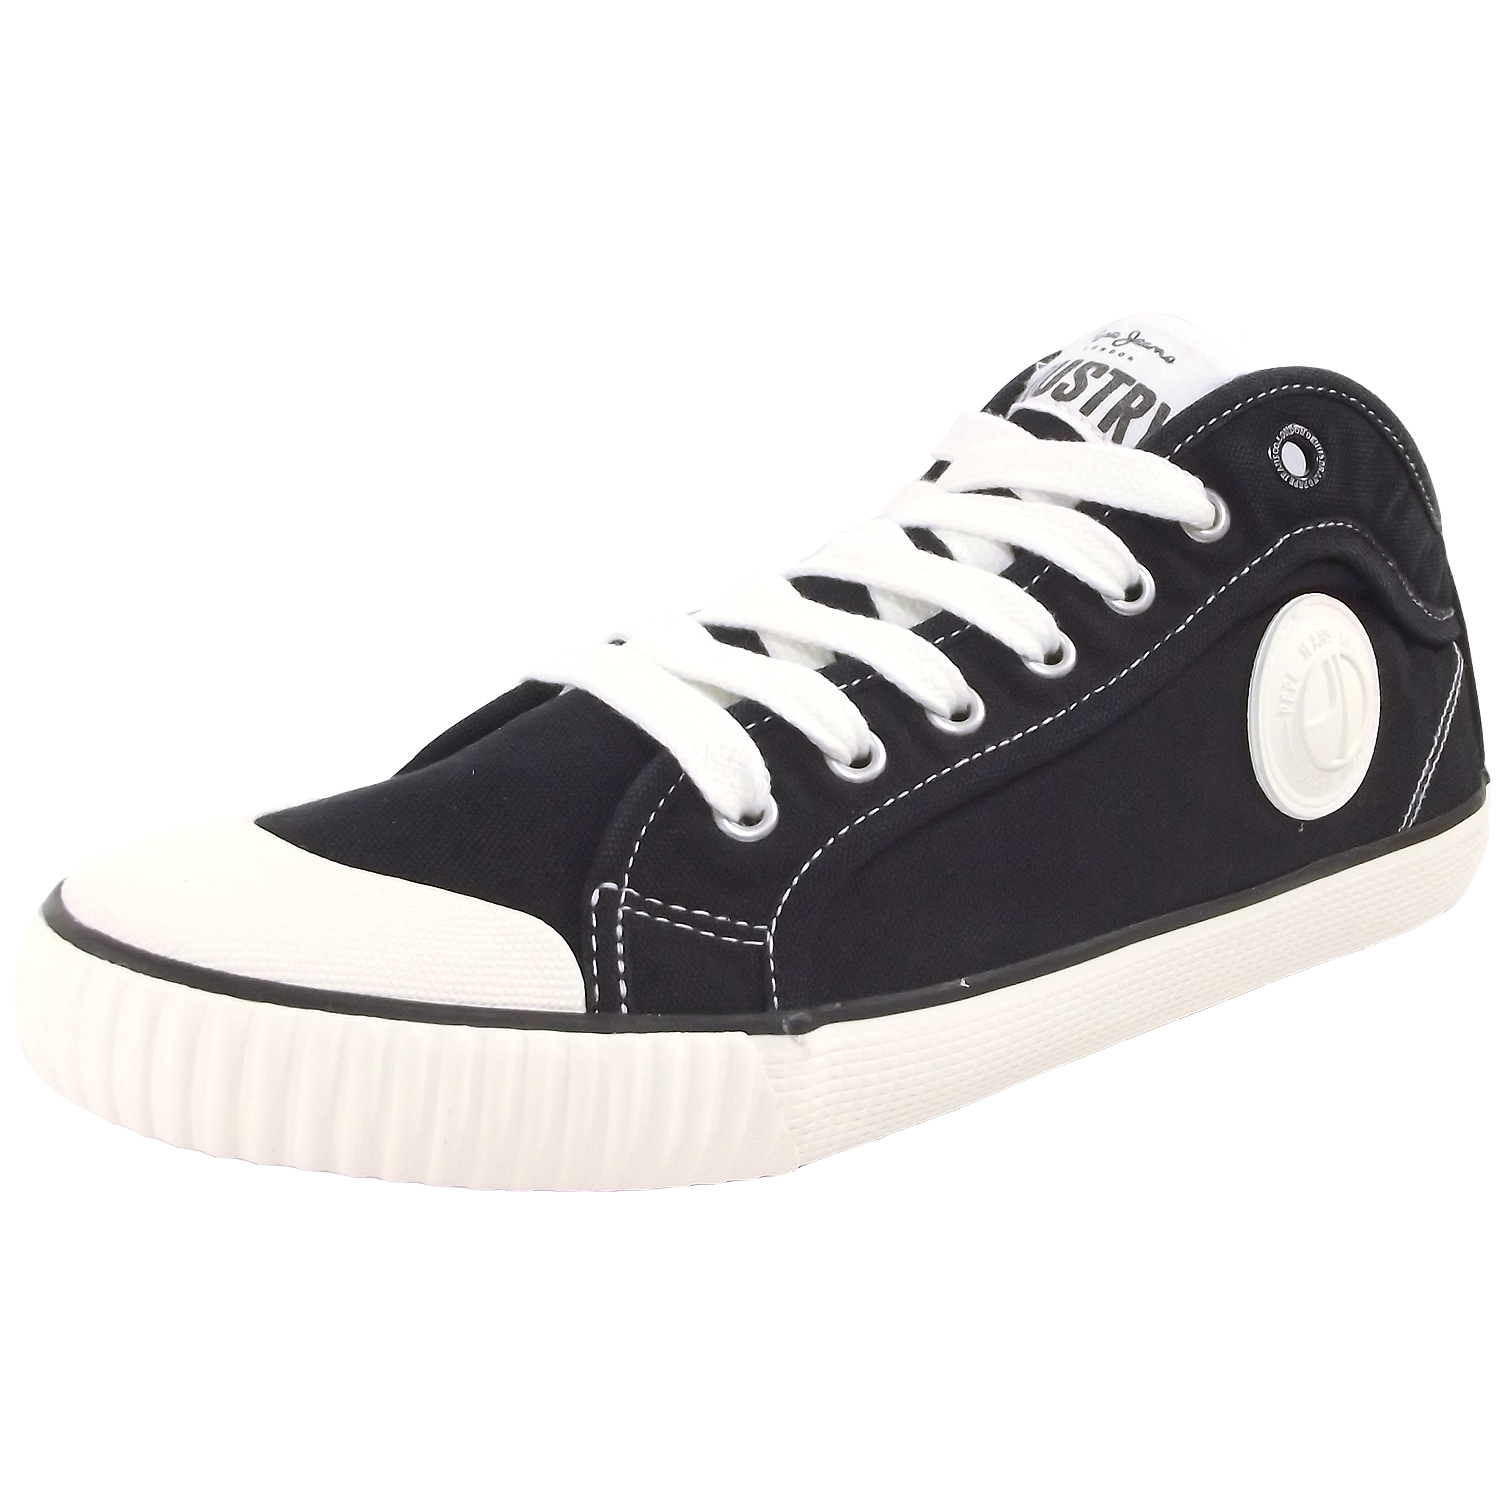 pepe jeans sport shoes